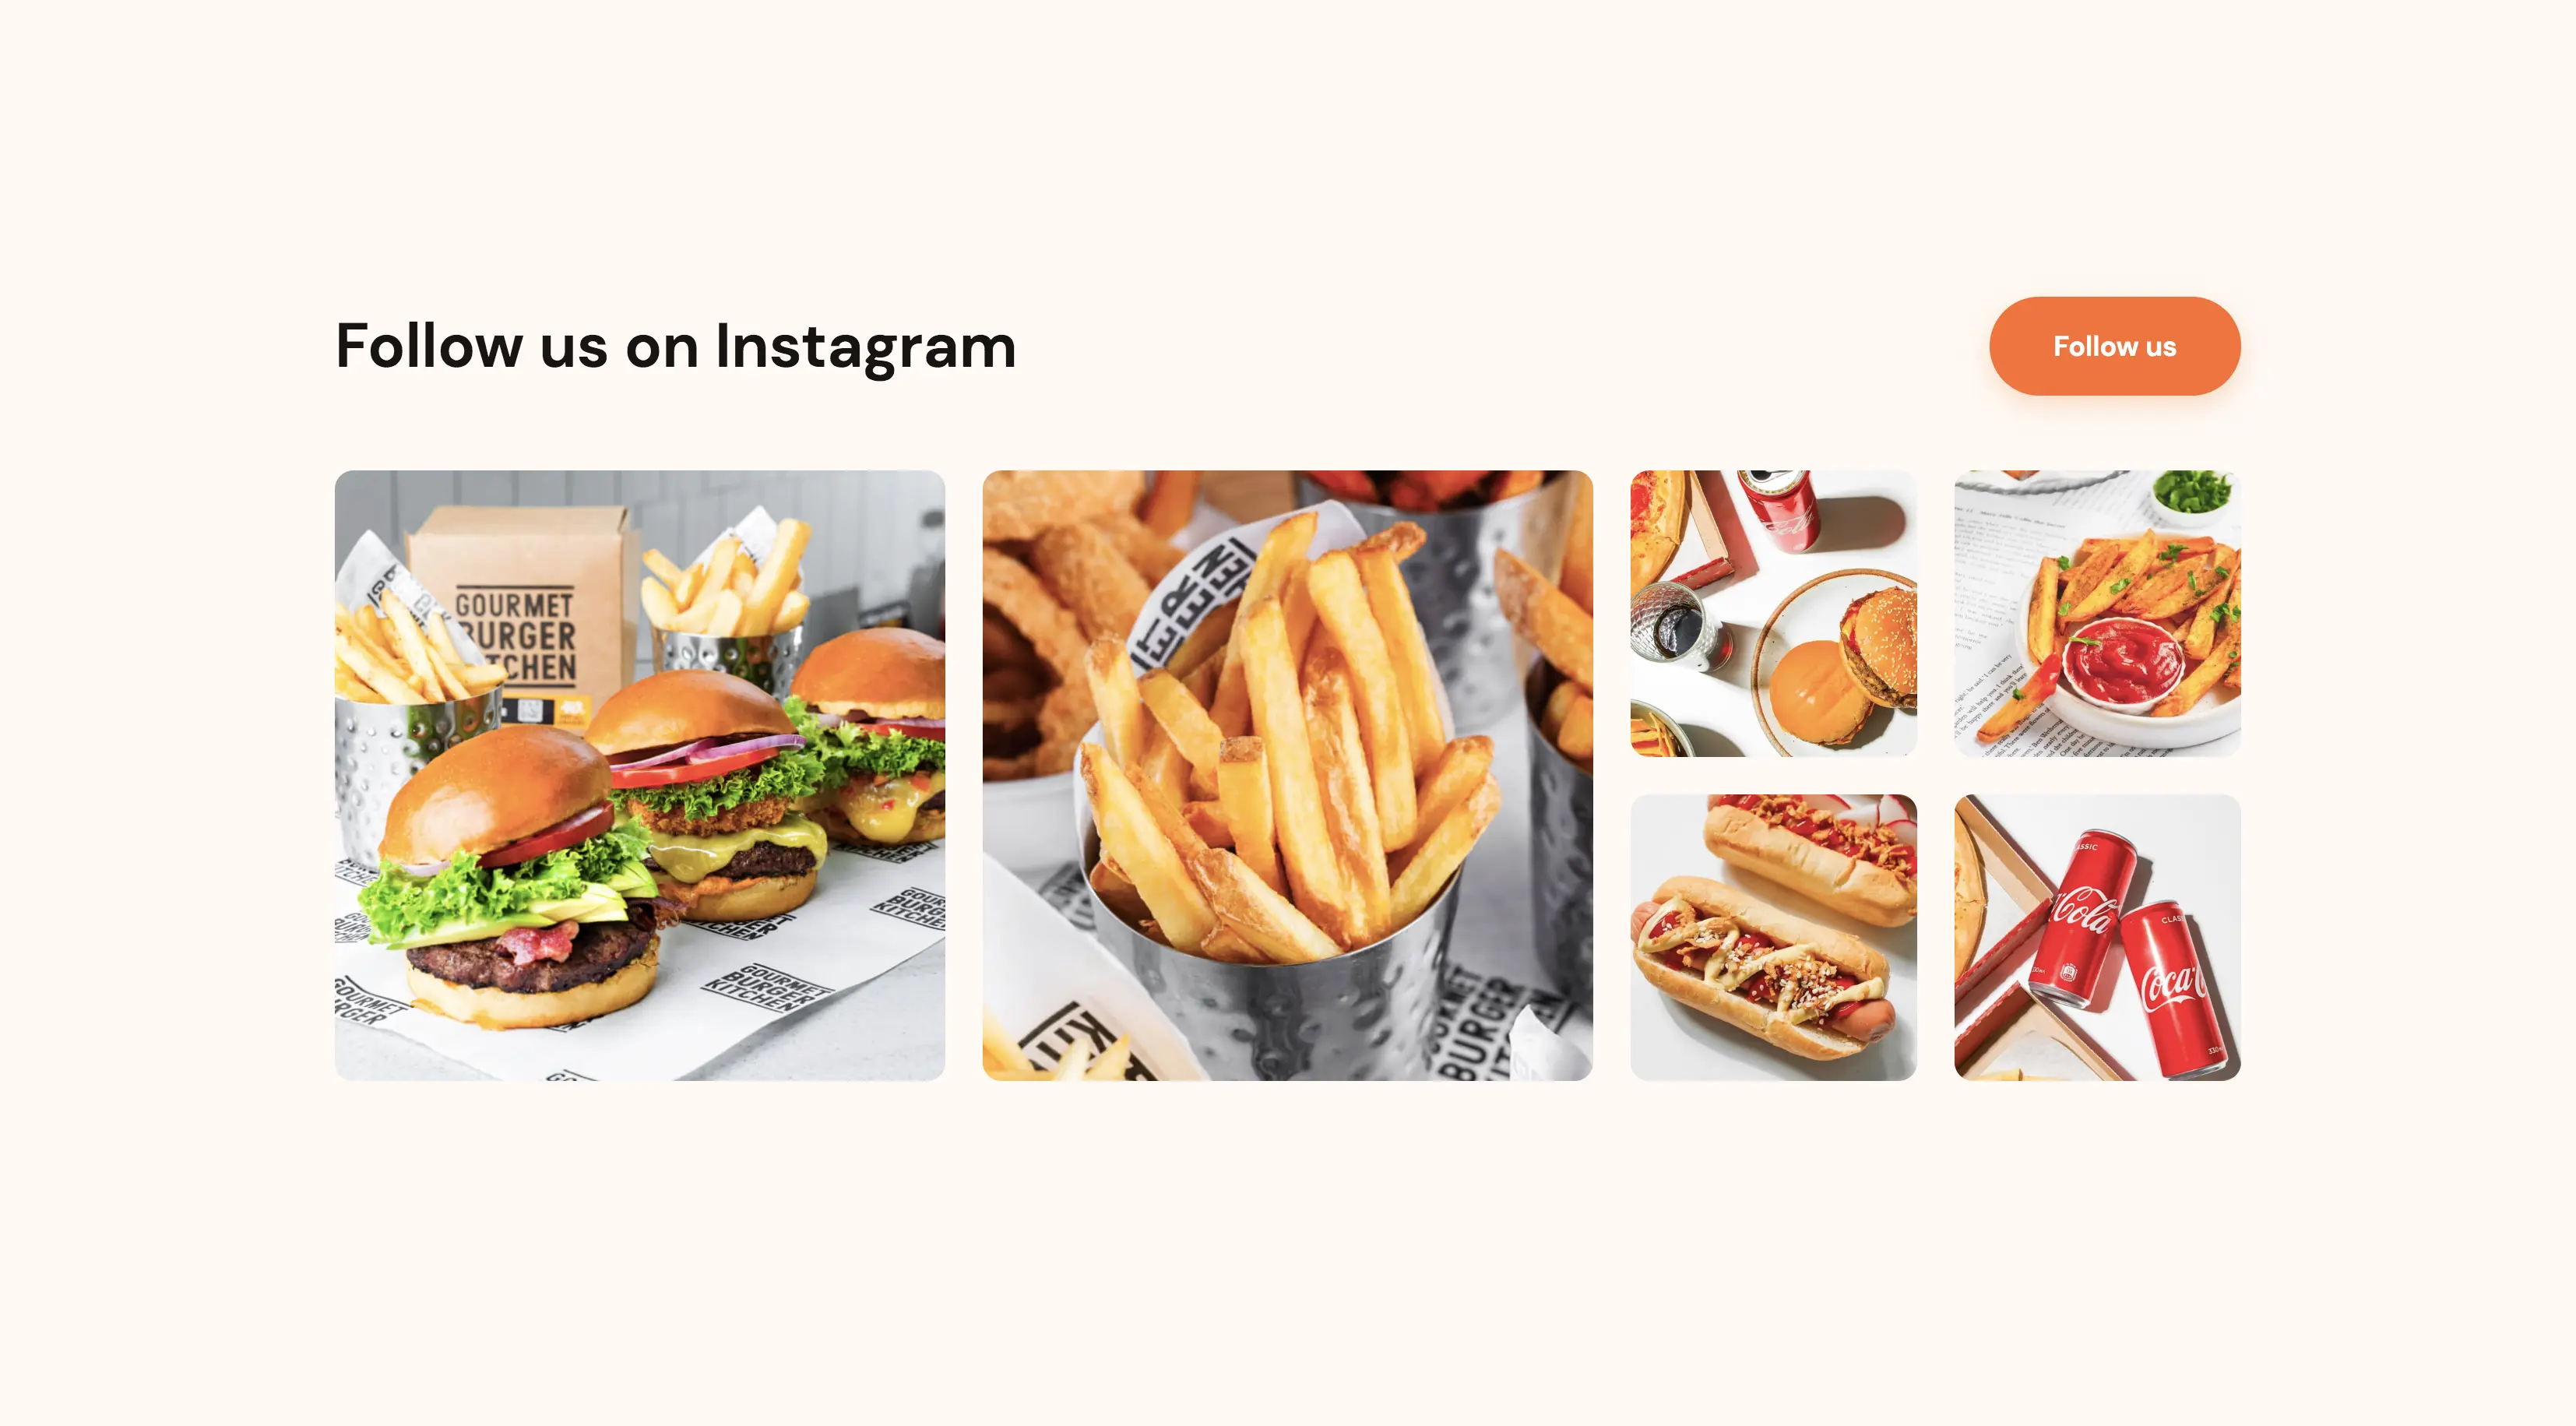 Restaurant A web site visual example part 5, instagram feed